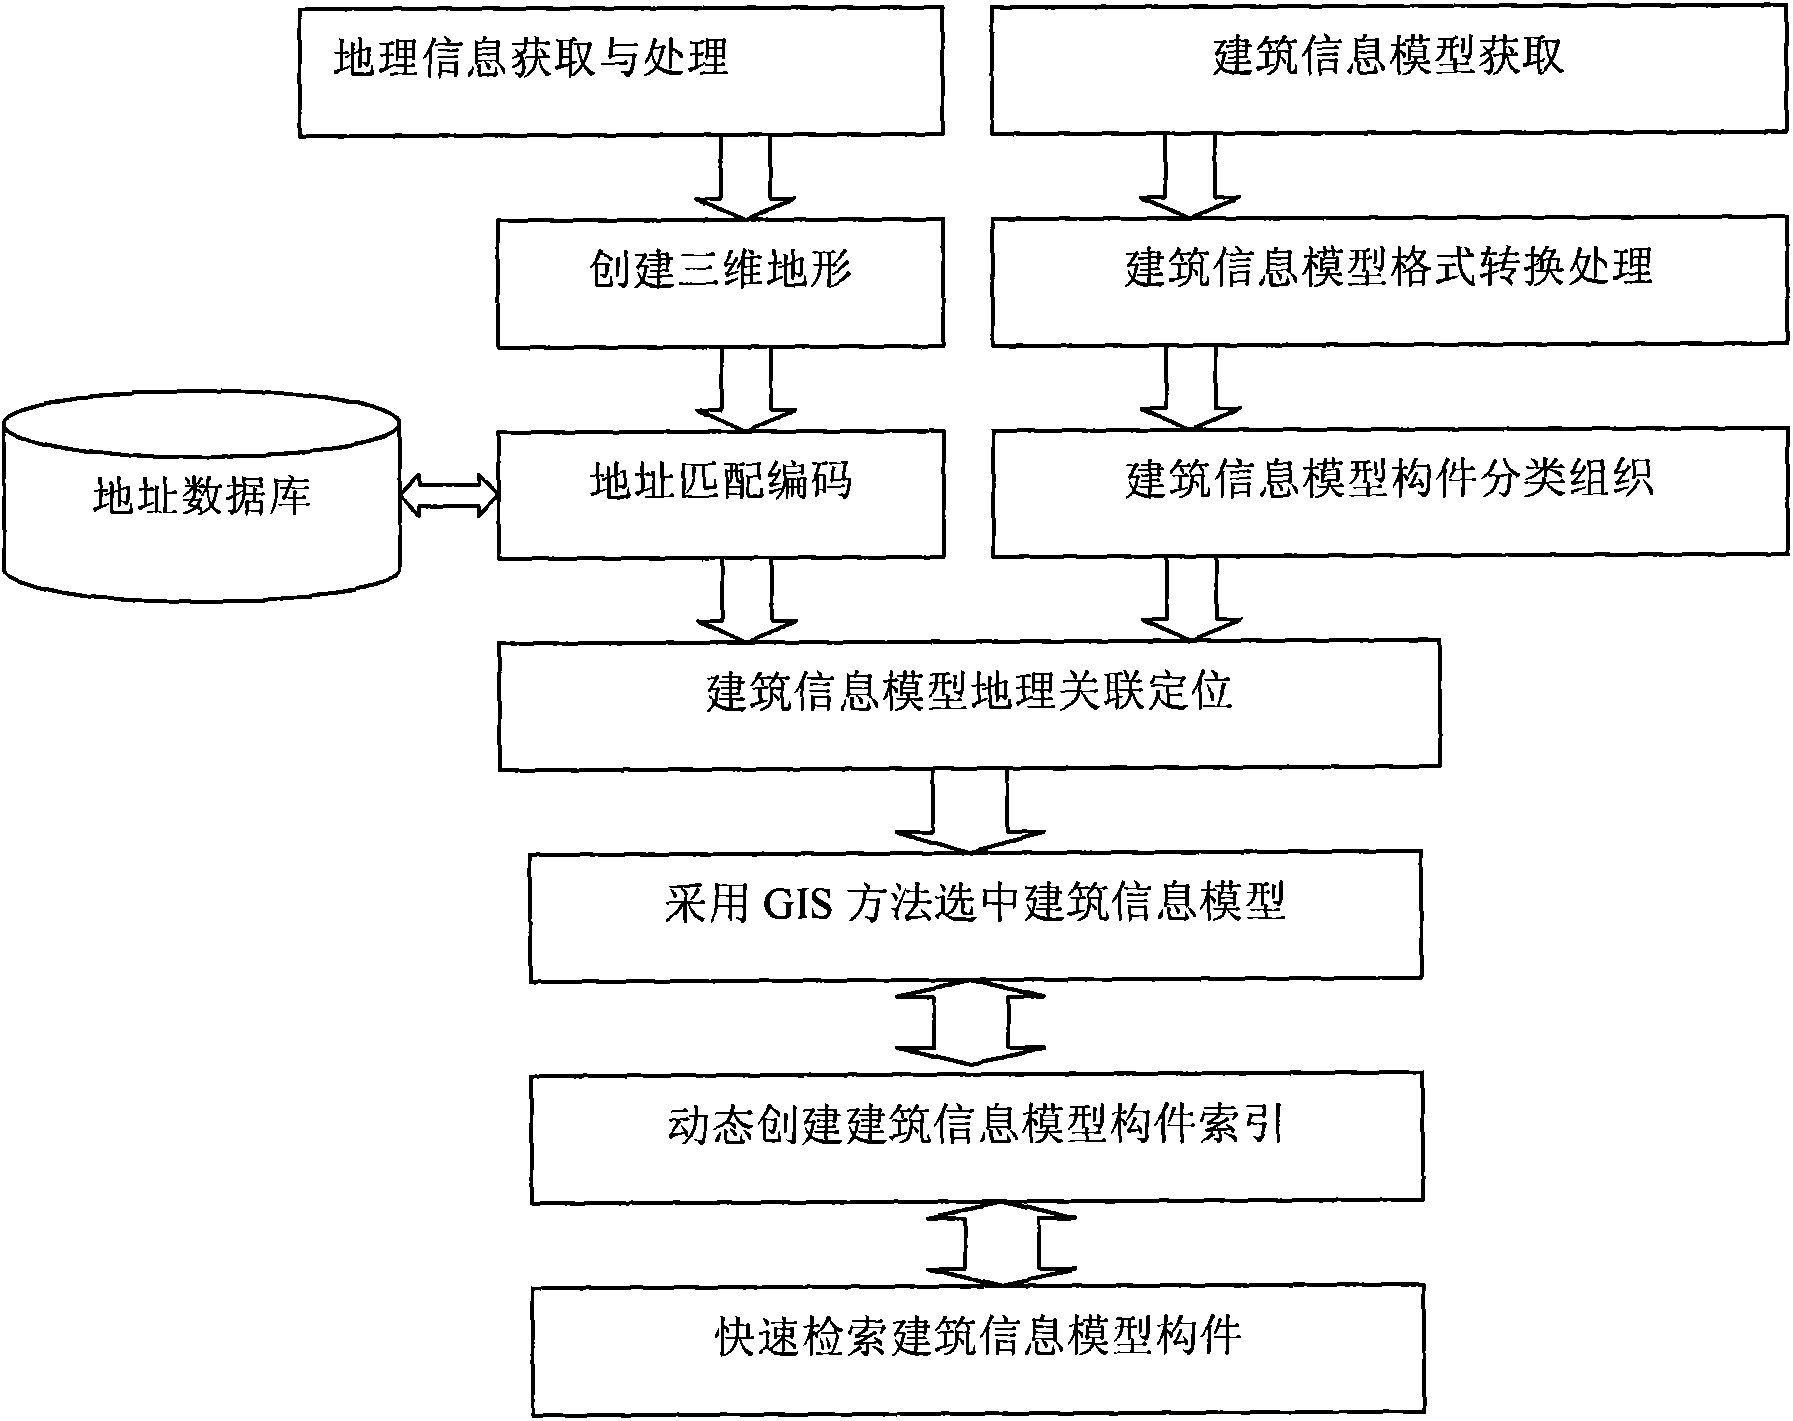 Geographic information model and building information model integrated associated index component method